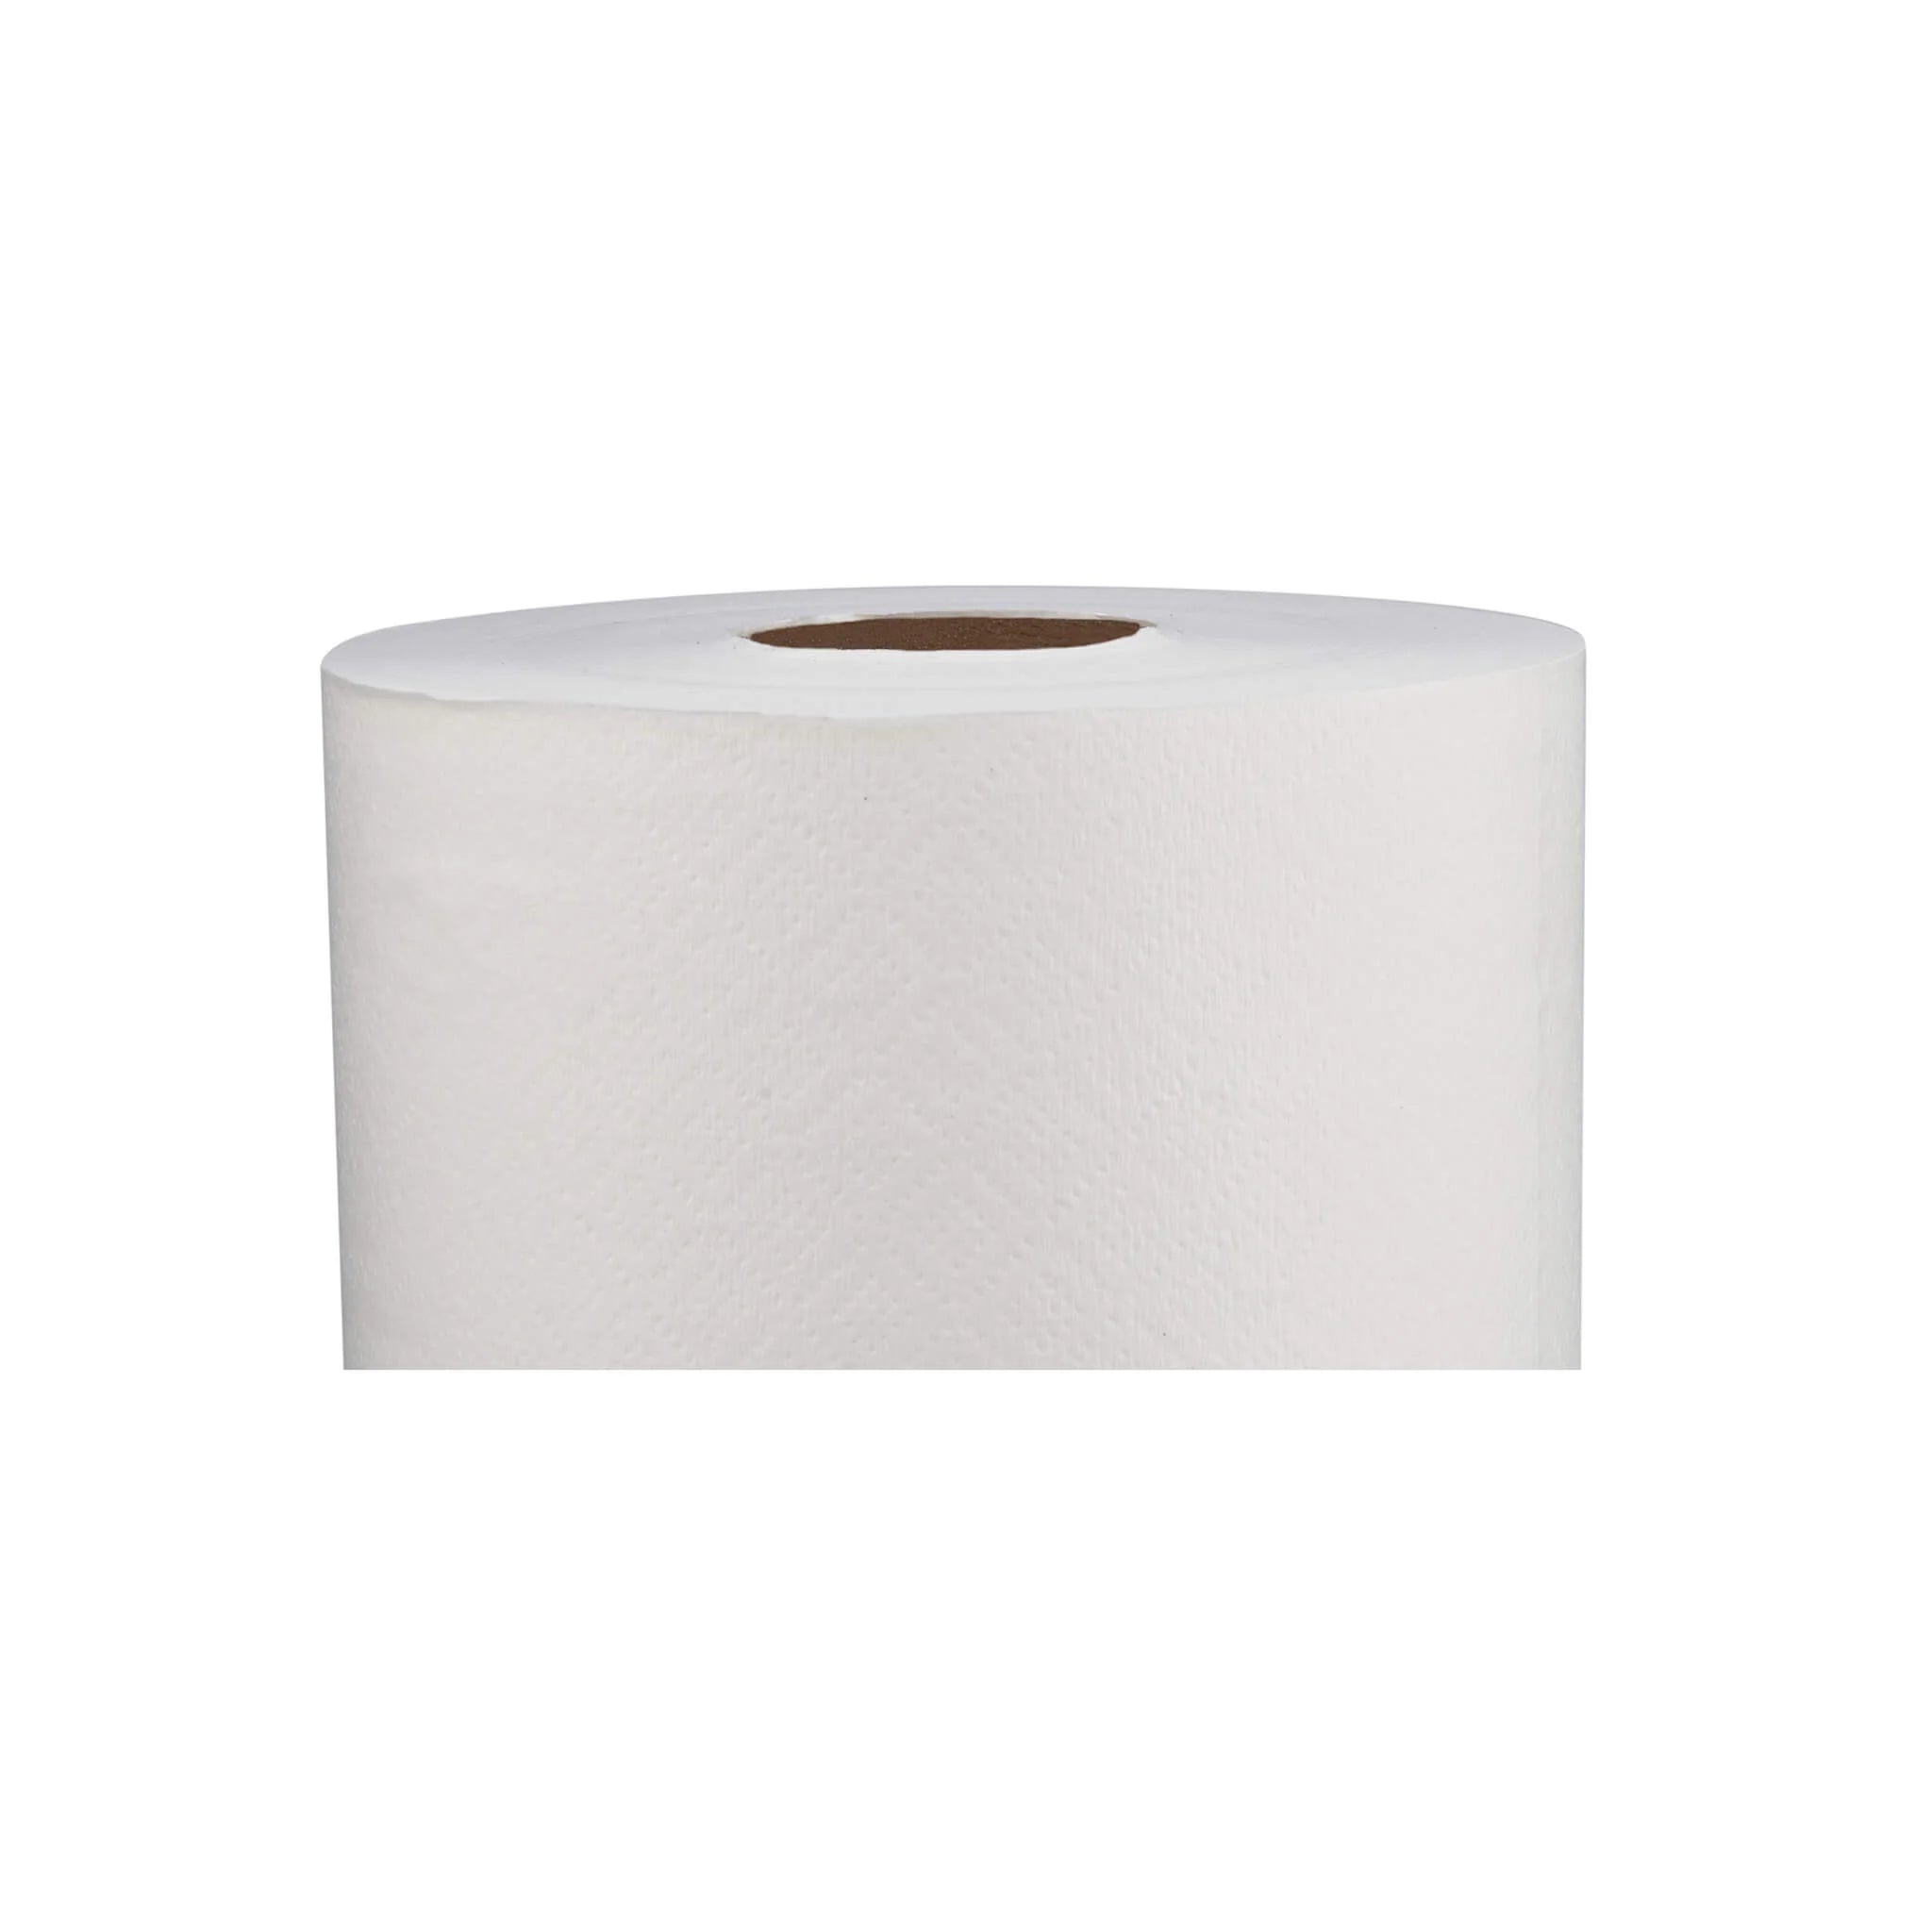 Soft N Cool Paper Maxi Roll Auto Cut 1 Ply 6 Pieces-150